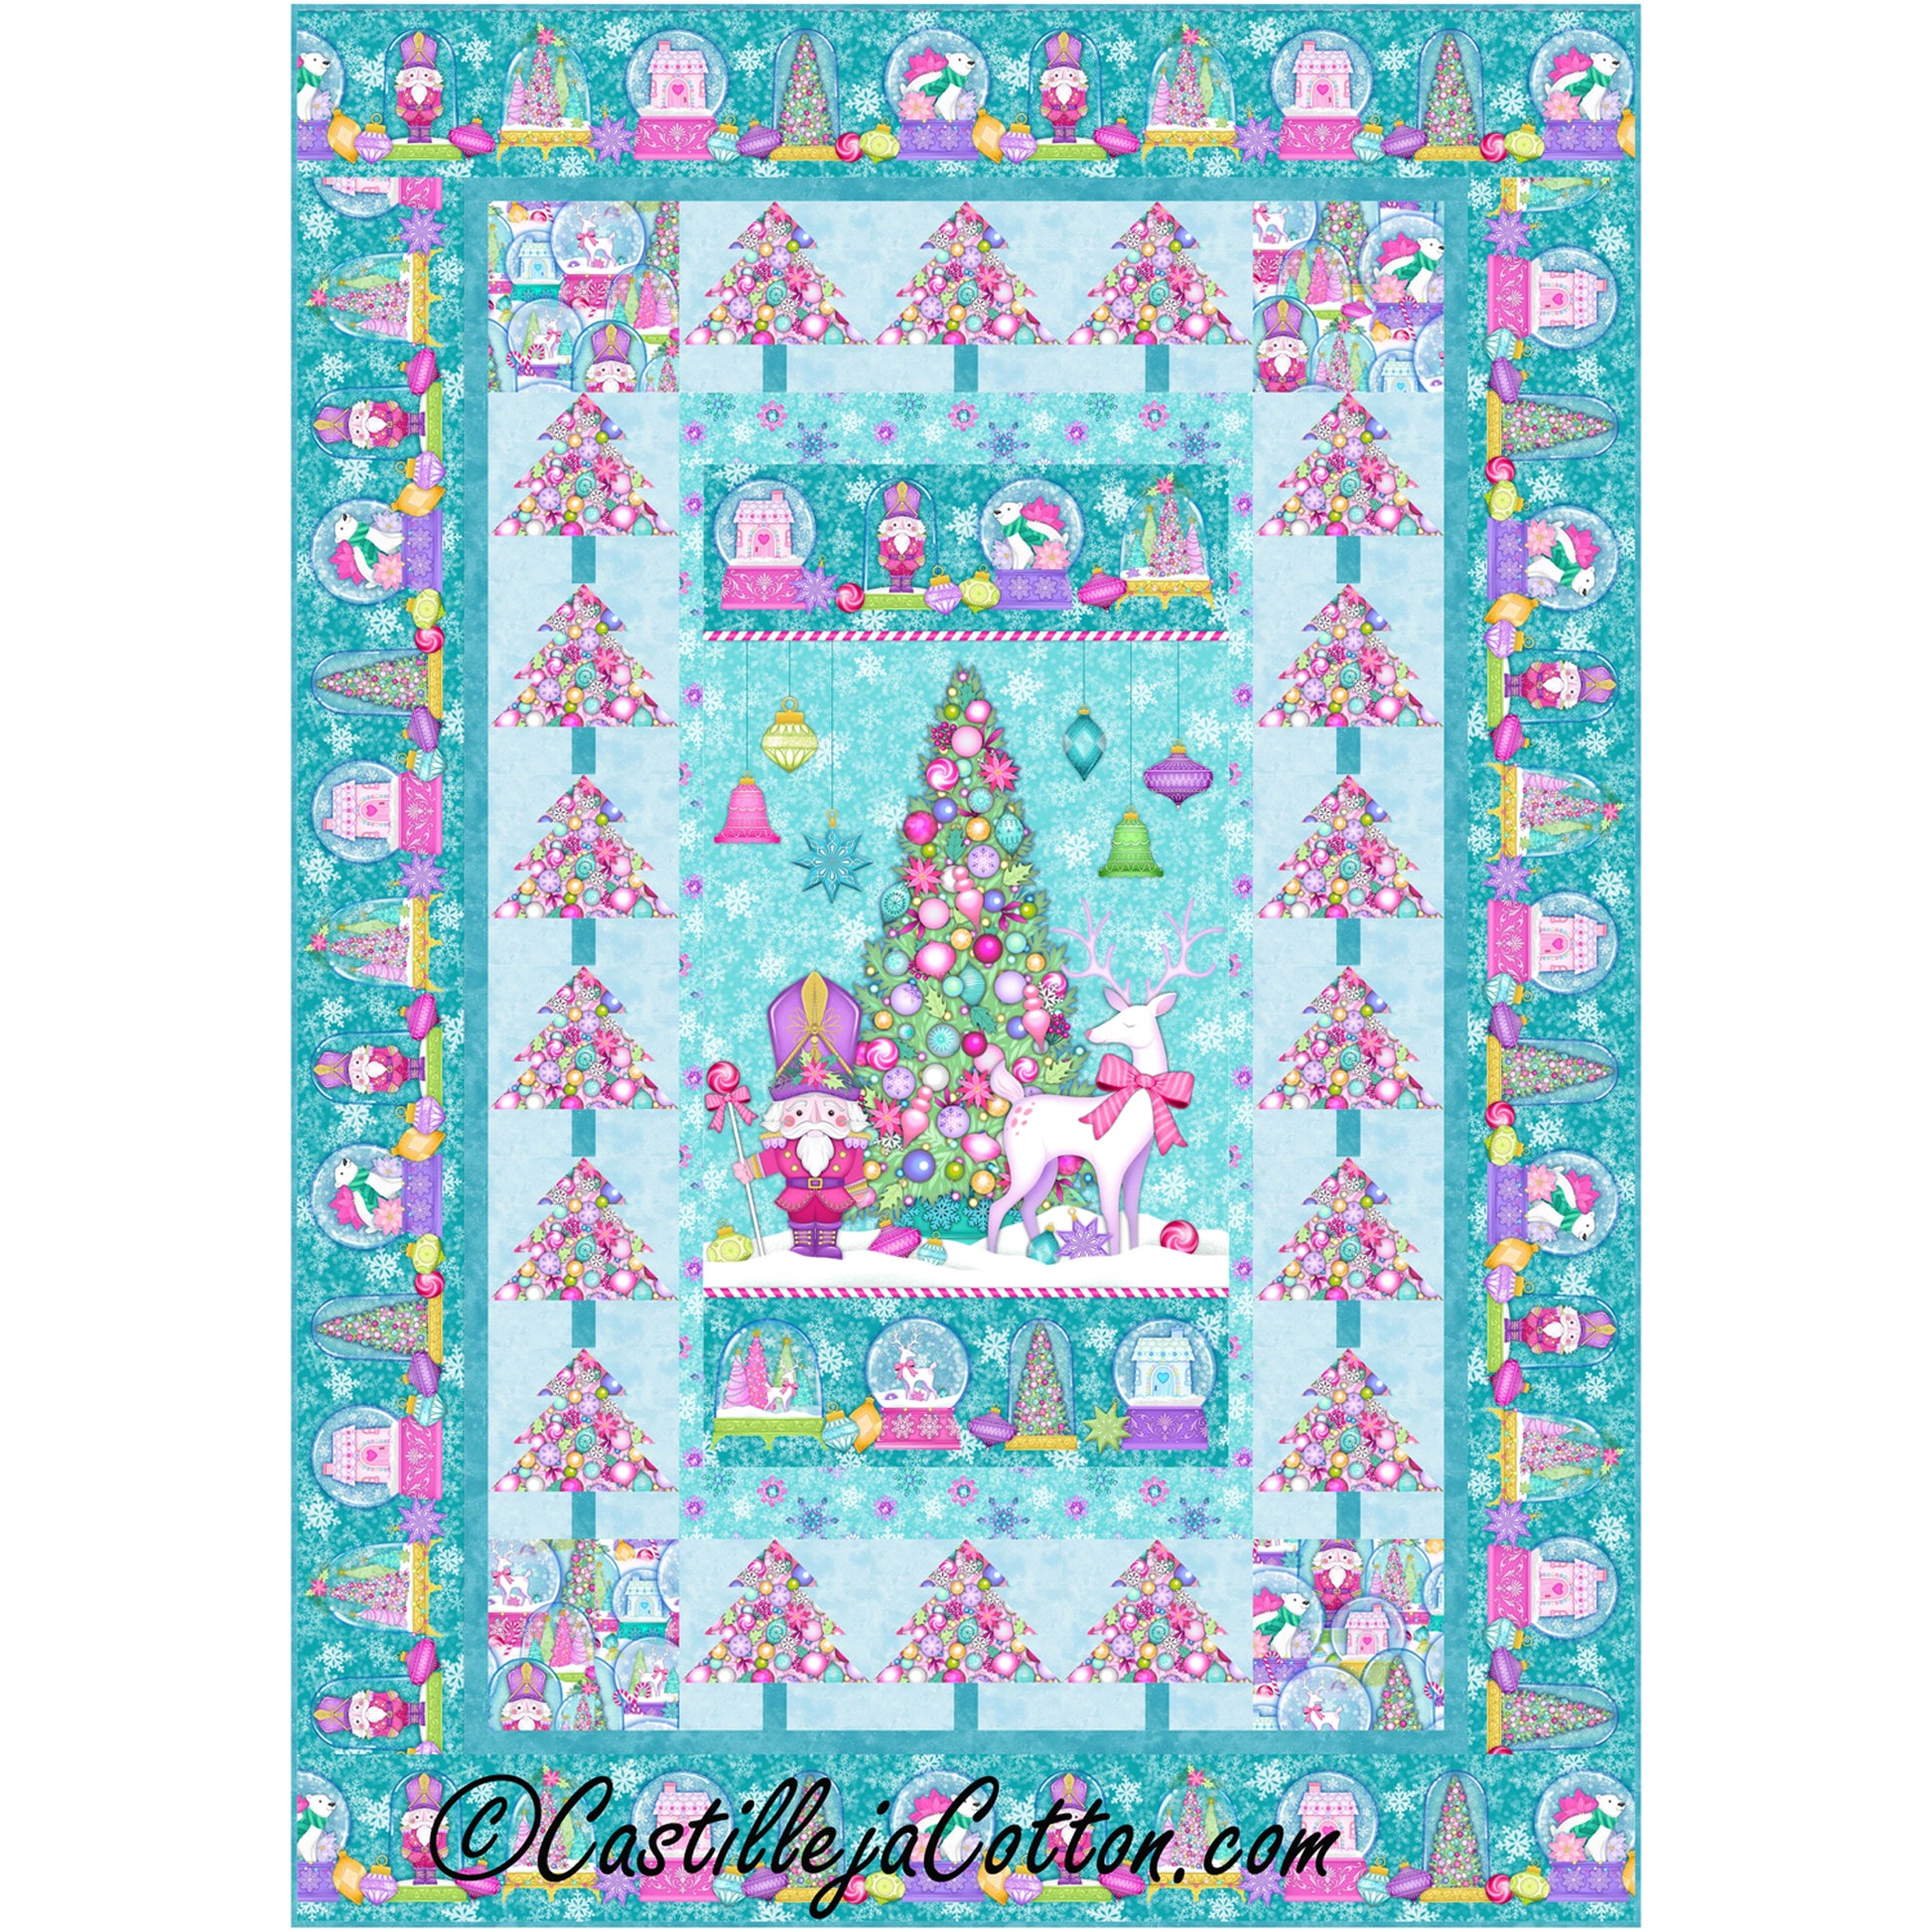 Festive quilt in shades of blue featuring a Christmas tree, snowman, and reindeer for seasonal charm.